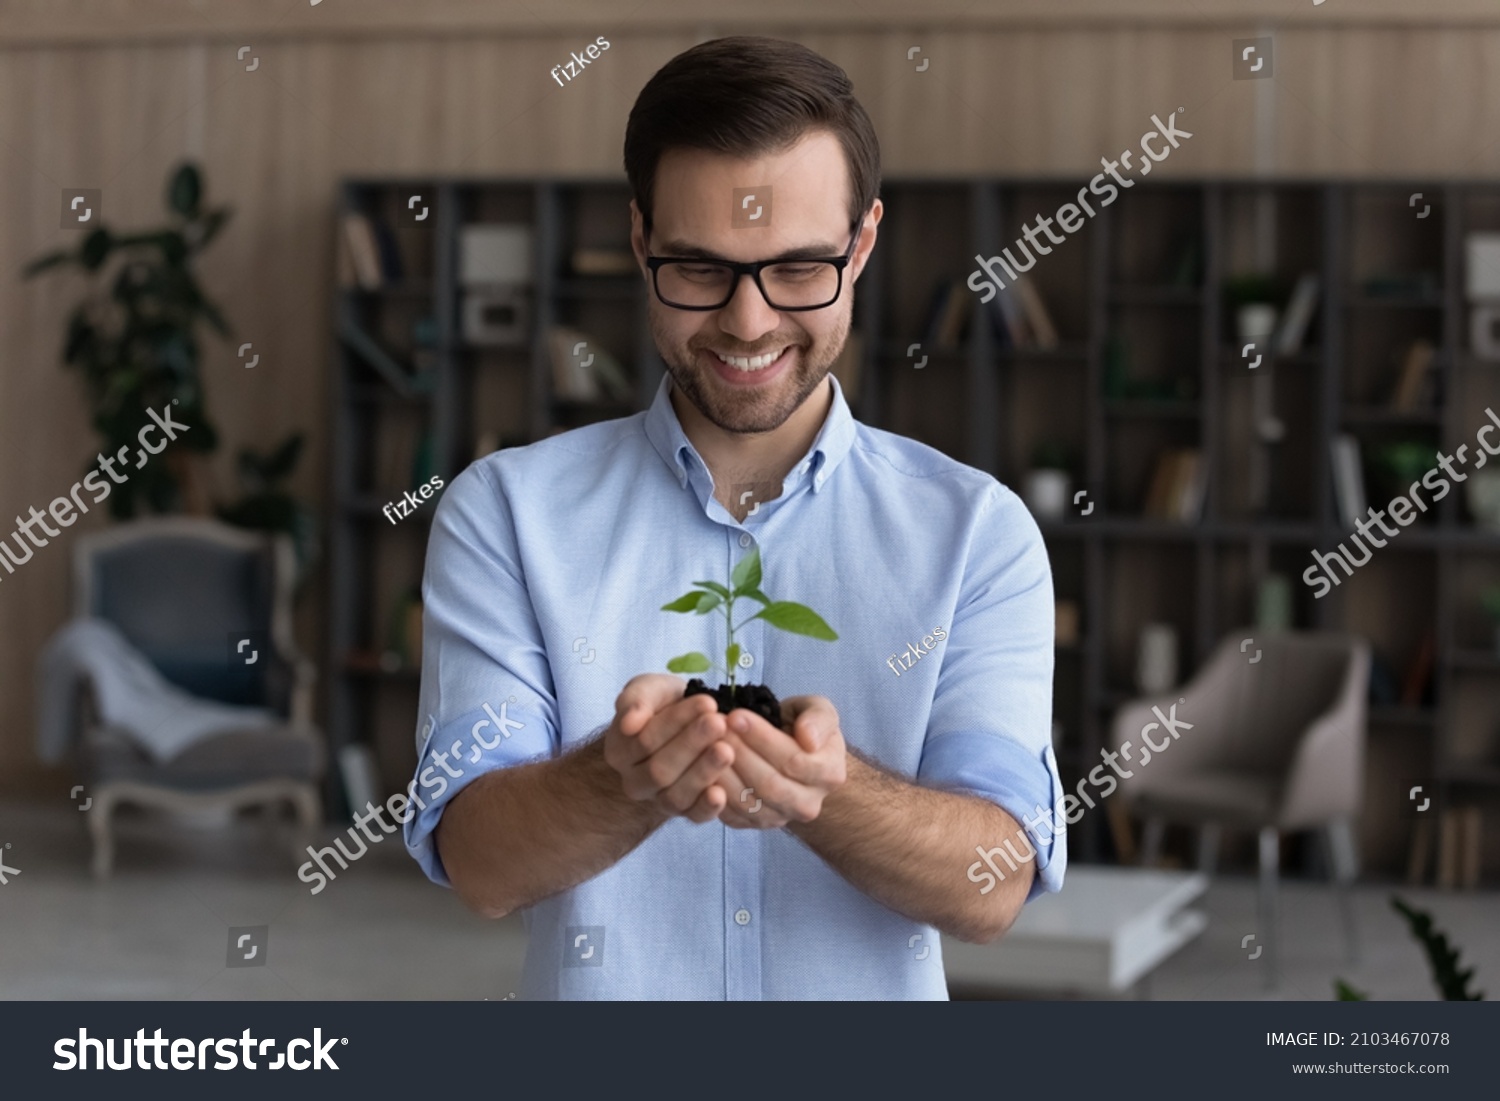 Smiling businessman wearing glasses holding small green plant sprout with soil, standing, happy entrepreneur employee with growing tree, startup project, profit, investment and growth concept #2103467078